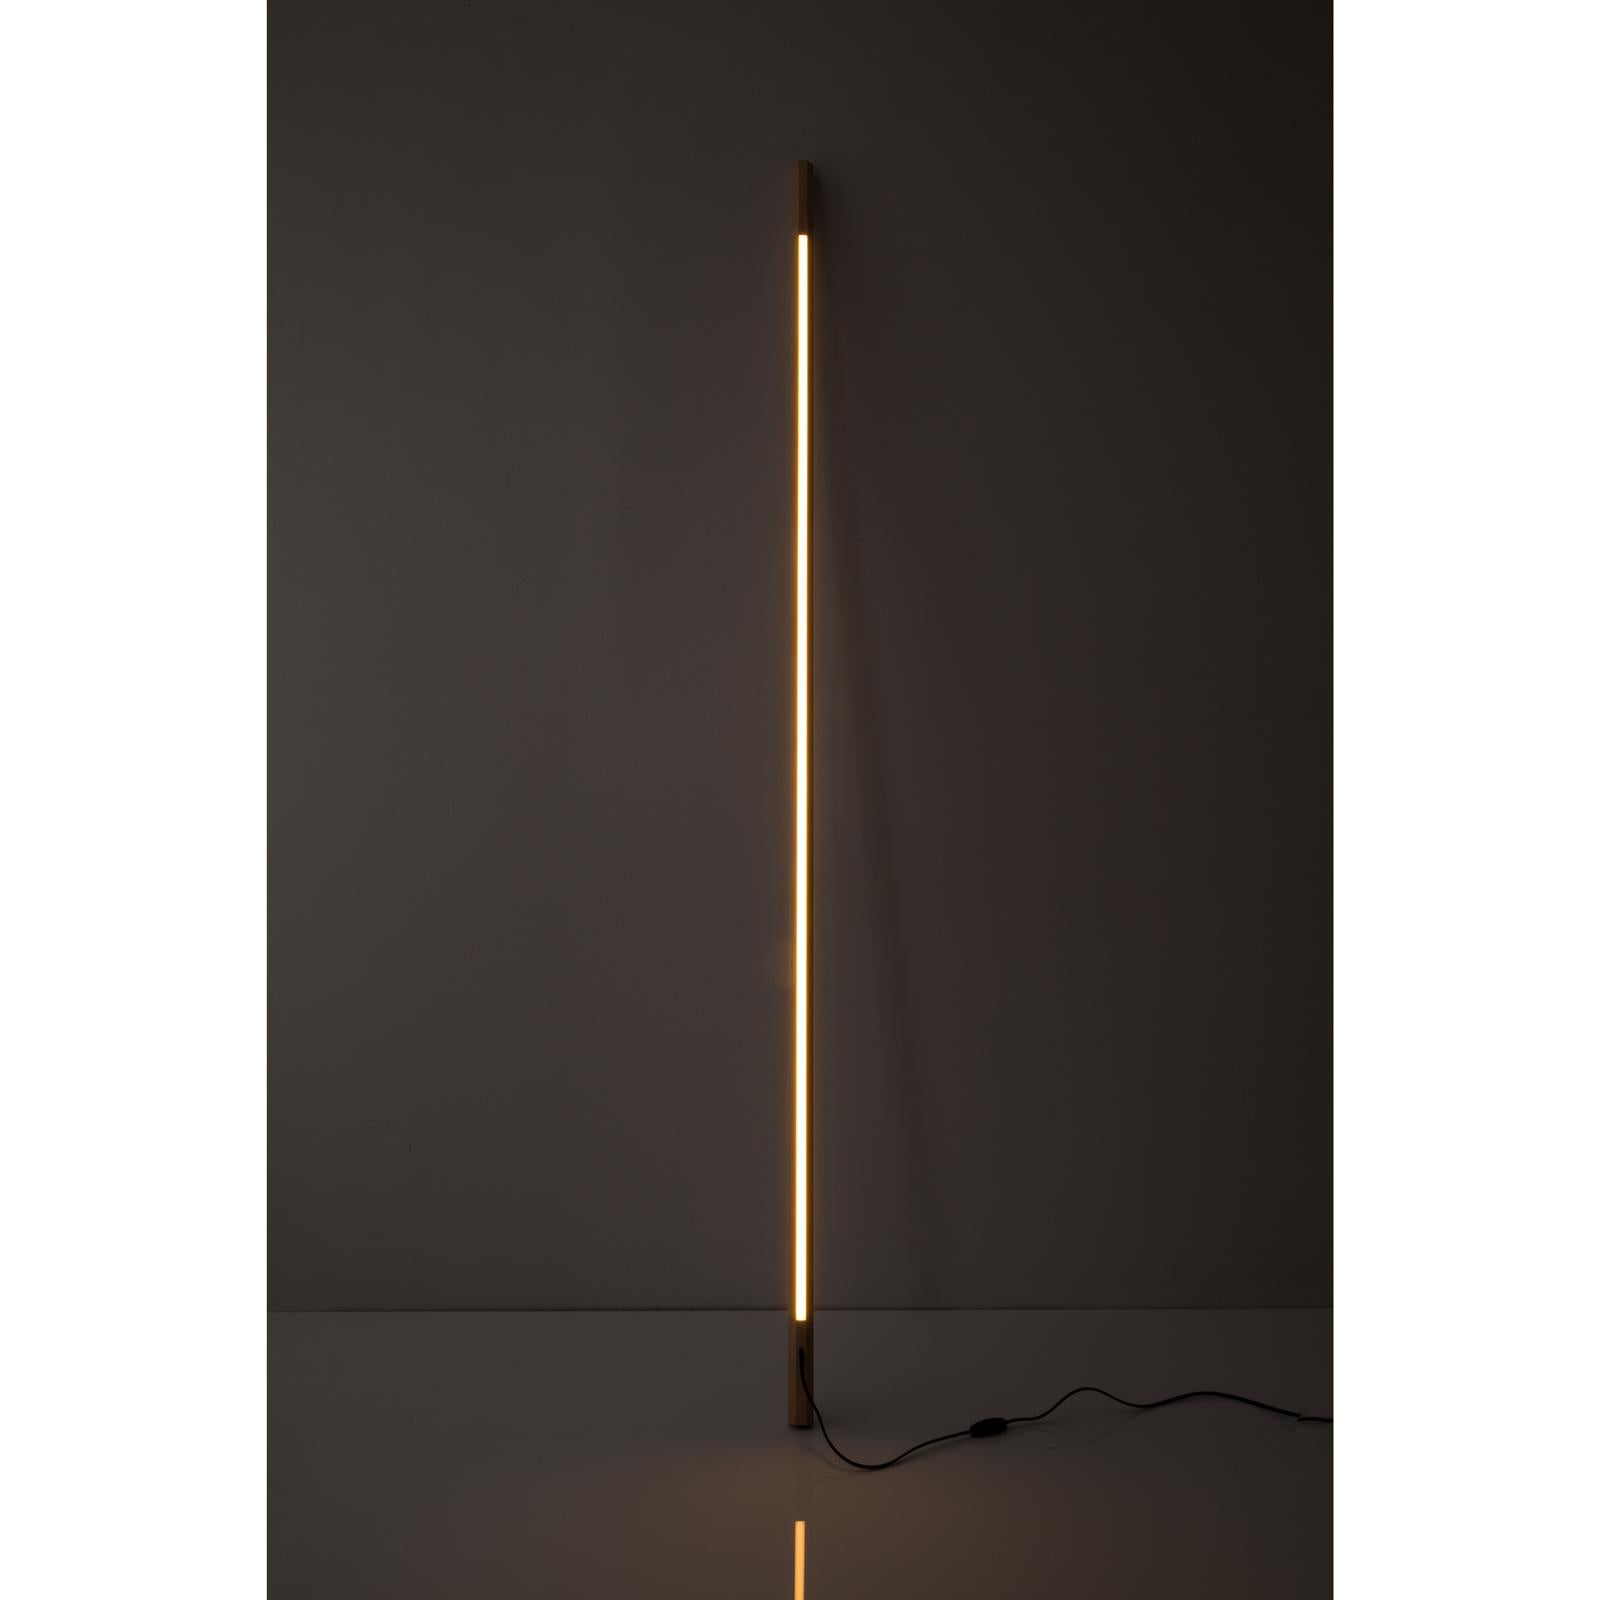 Fort Makers LED Maple Line Light is made in Brooklyn by Noah Spencer. This sculptural light juxtaposes hard lines with soft reflected light and emits an ambient aura. The lifespan of an LED strip is approximately 50,000 hours.

Materials: maple,